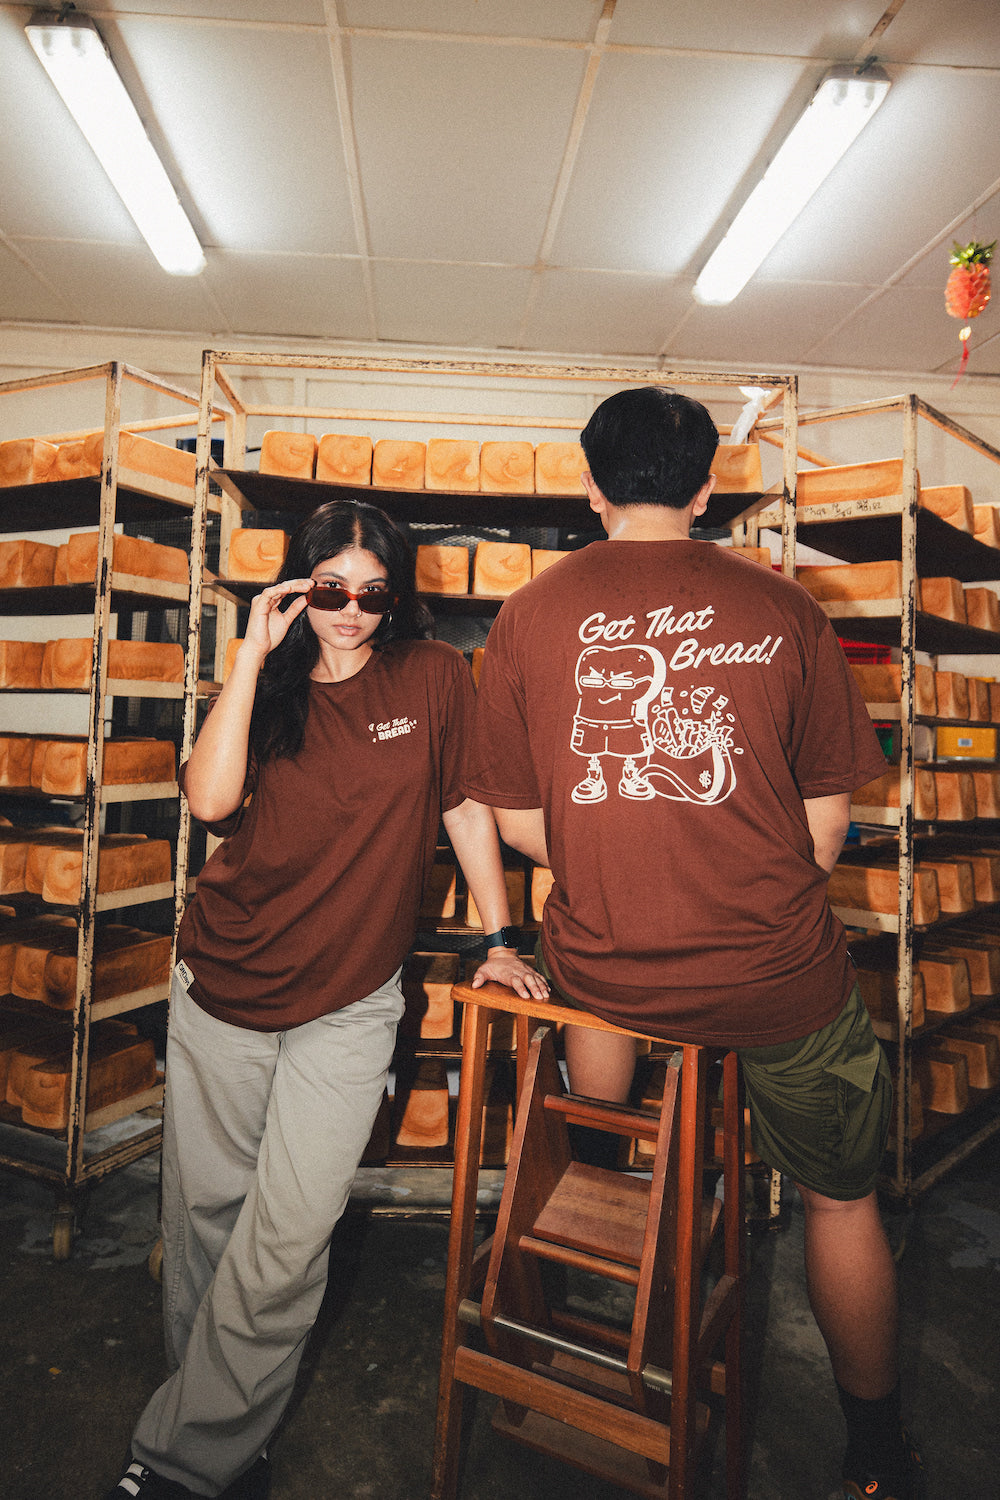 man's back and woman front facing a camera in brown graphic t shirt in a bakery